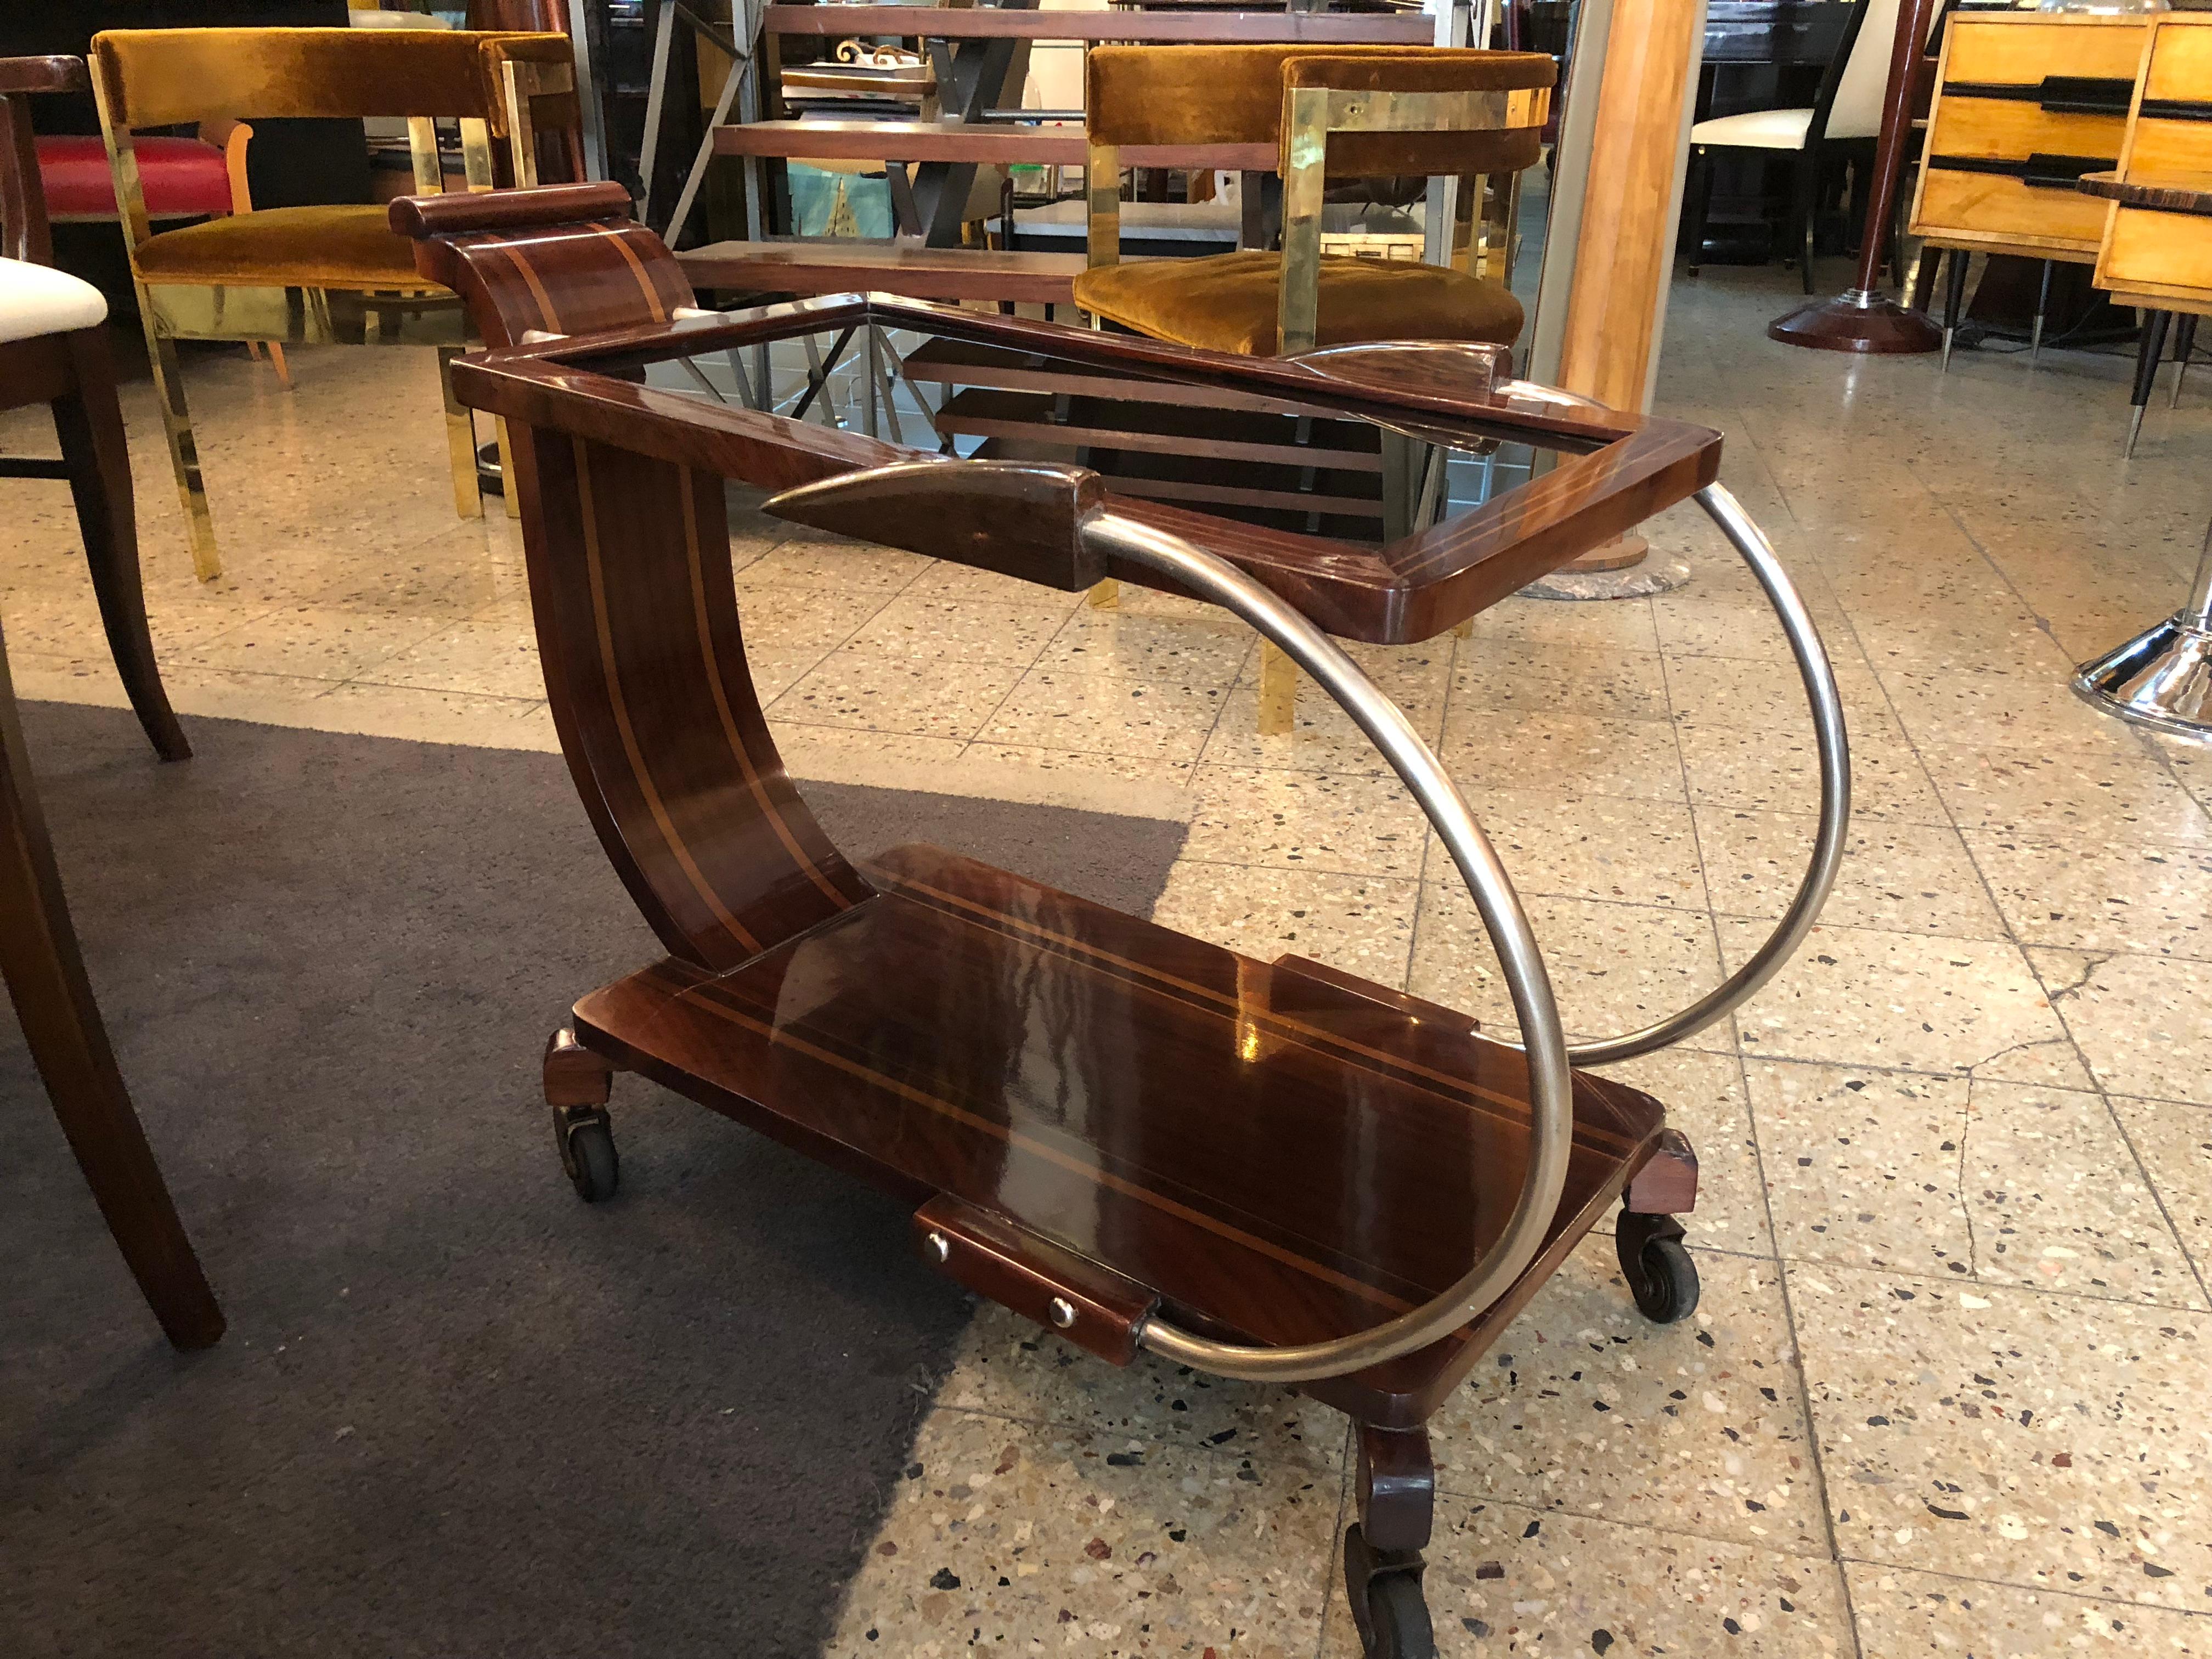 Amaizing Bar 

Materials: wood and glass
Style: Art Deco
If you want to live in the golden years, this is the bar that your project needs.
We have specialized in the sale of Art Deco and Art Nouveau styles since 1982.If you have any questions we are